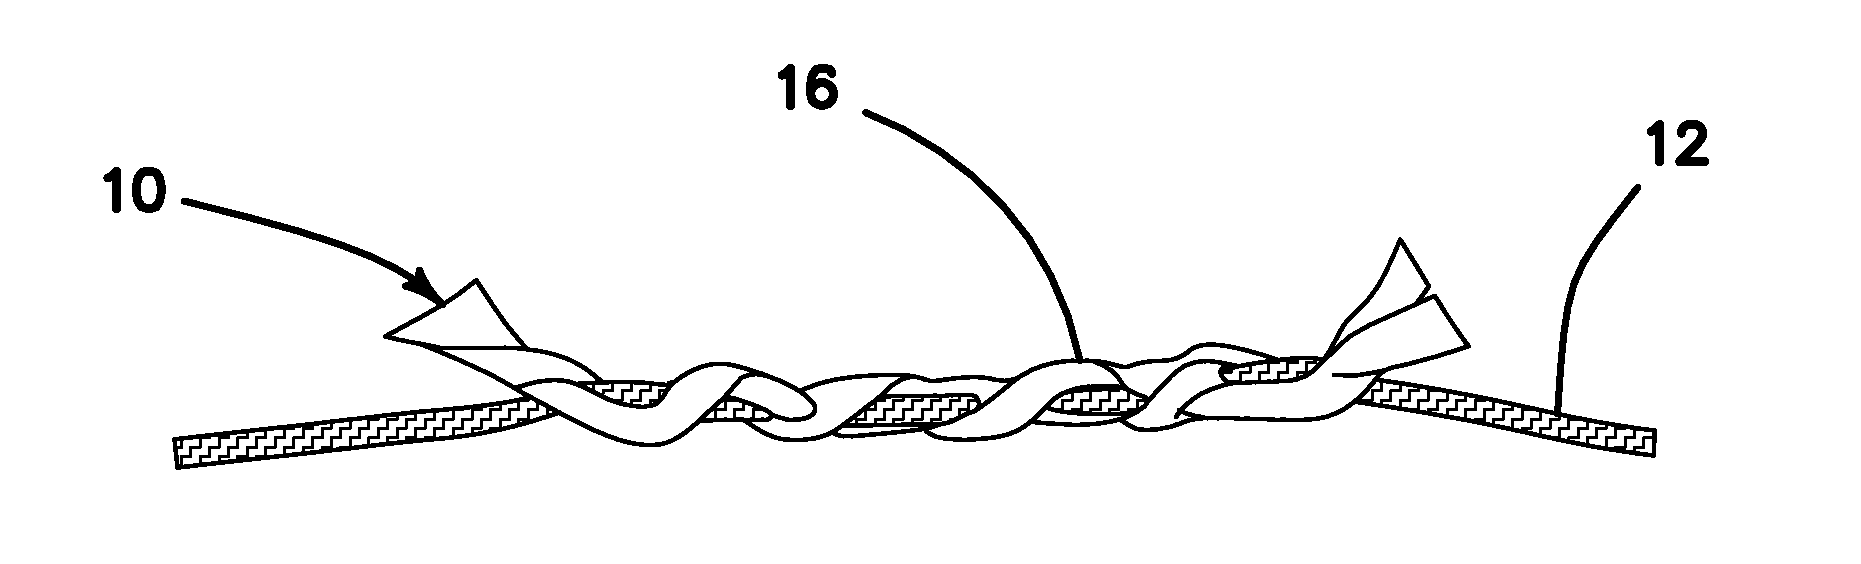 All-suture suture anchor systems and methods